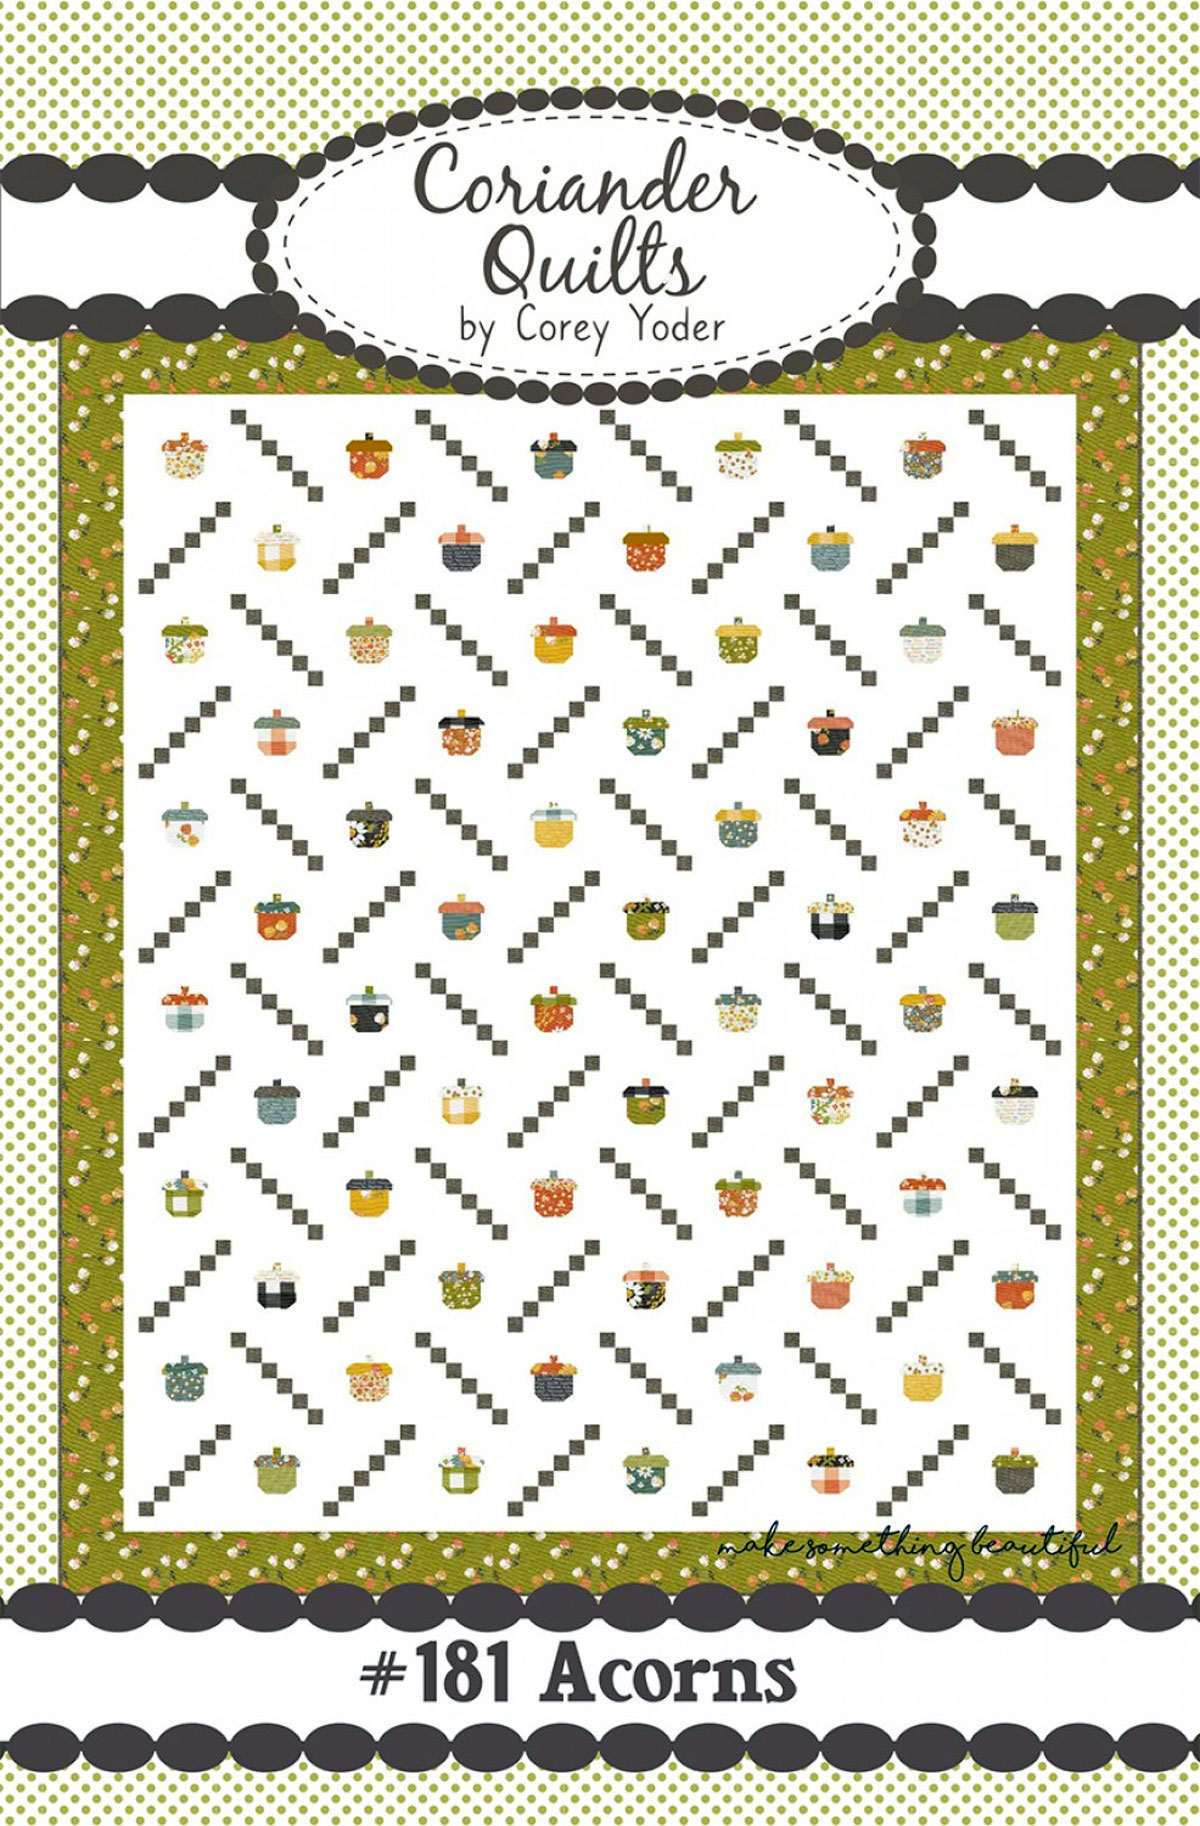 Acorns-quilt-sewing-pattern-Coriander-Quilts-front